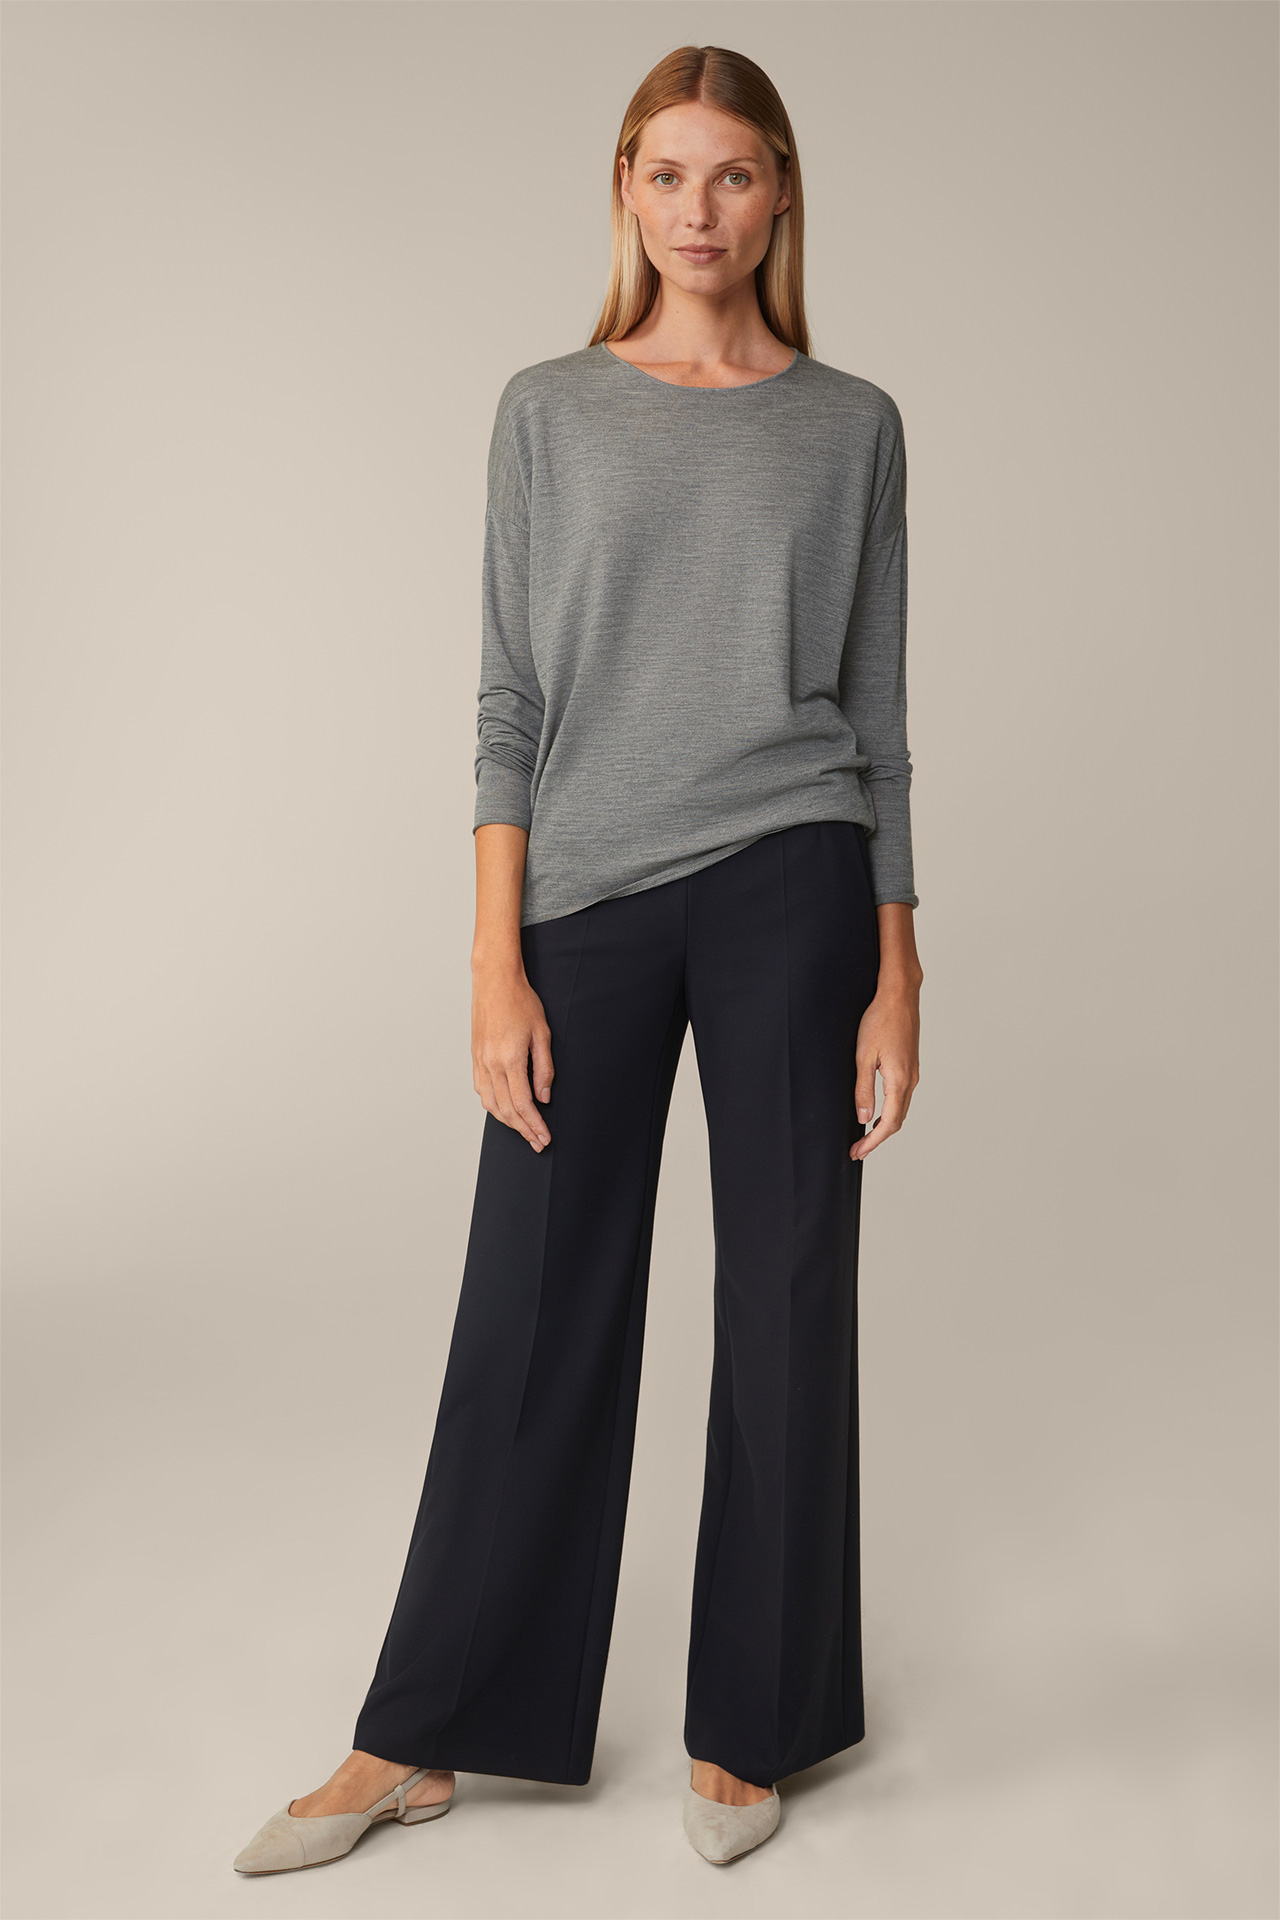 Virgin Wool and Silk Mix Pullover in Grey Marl